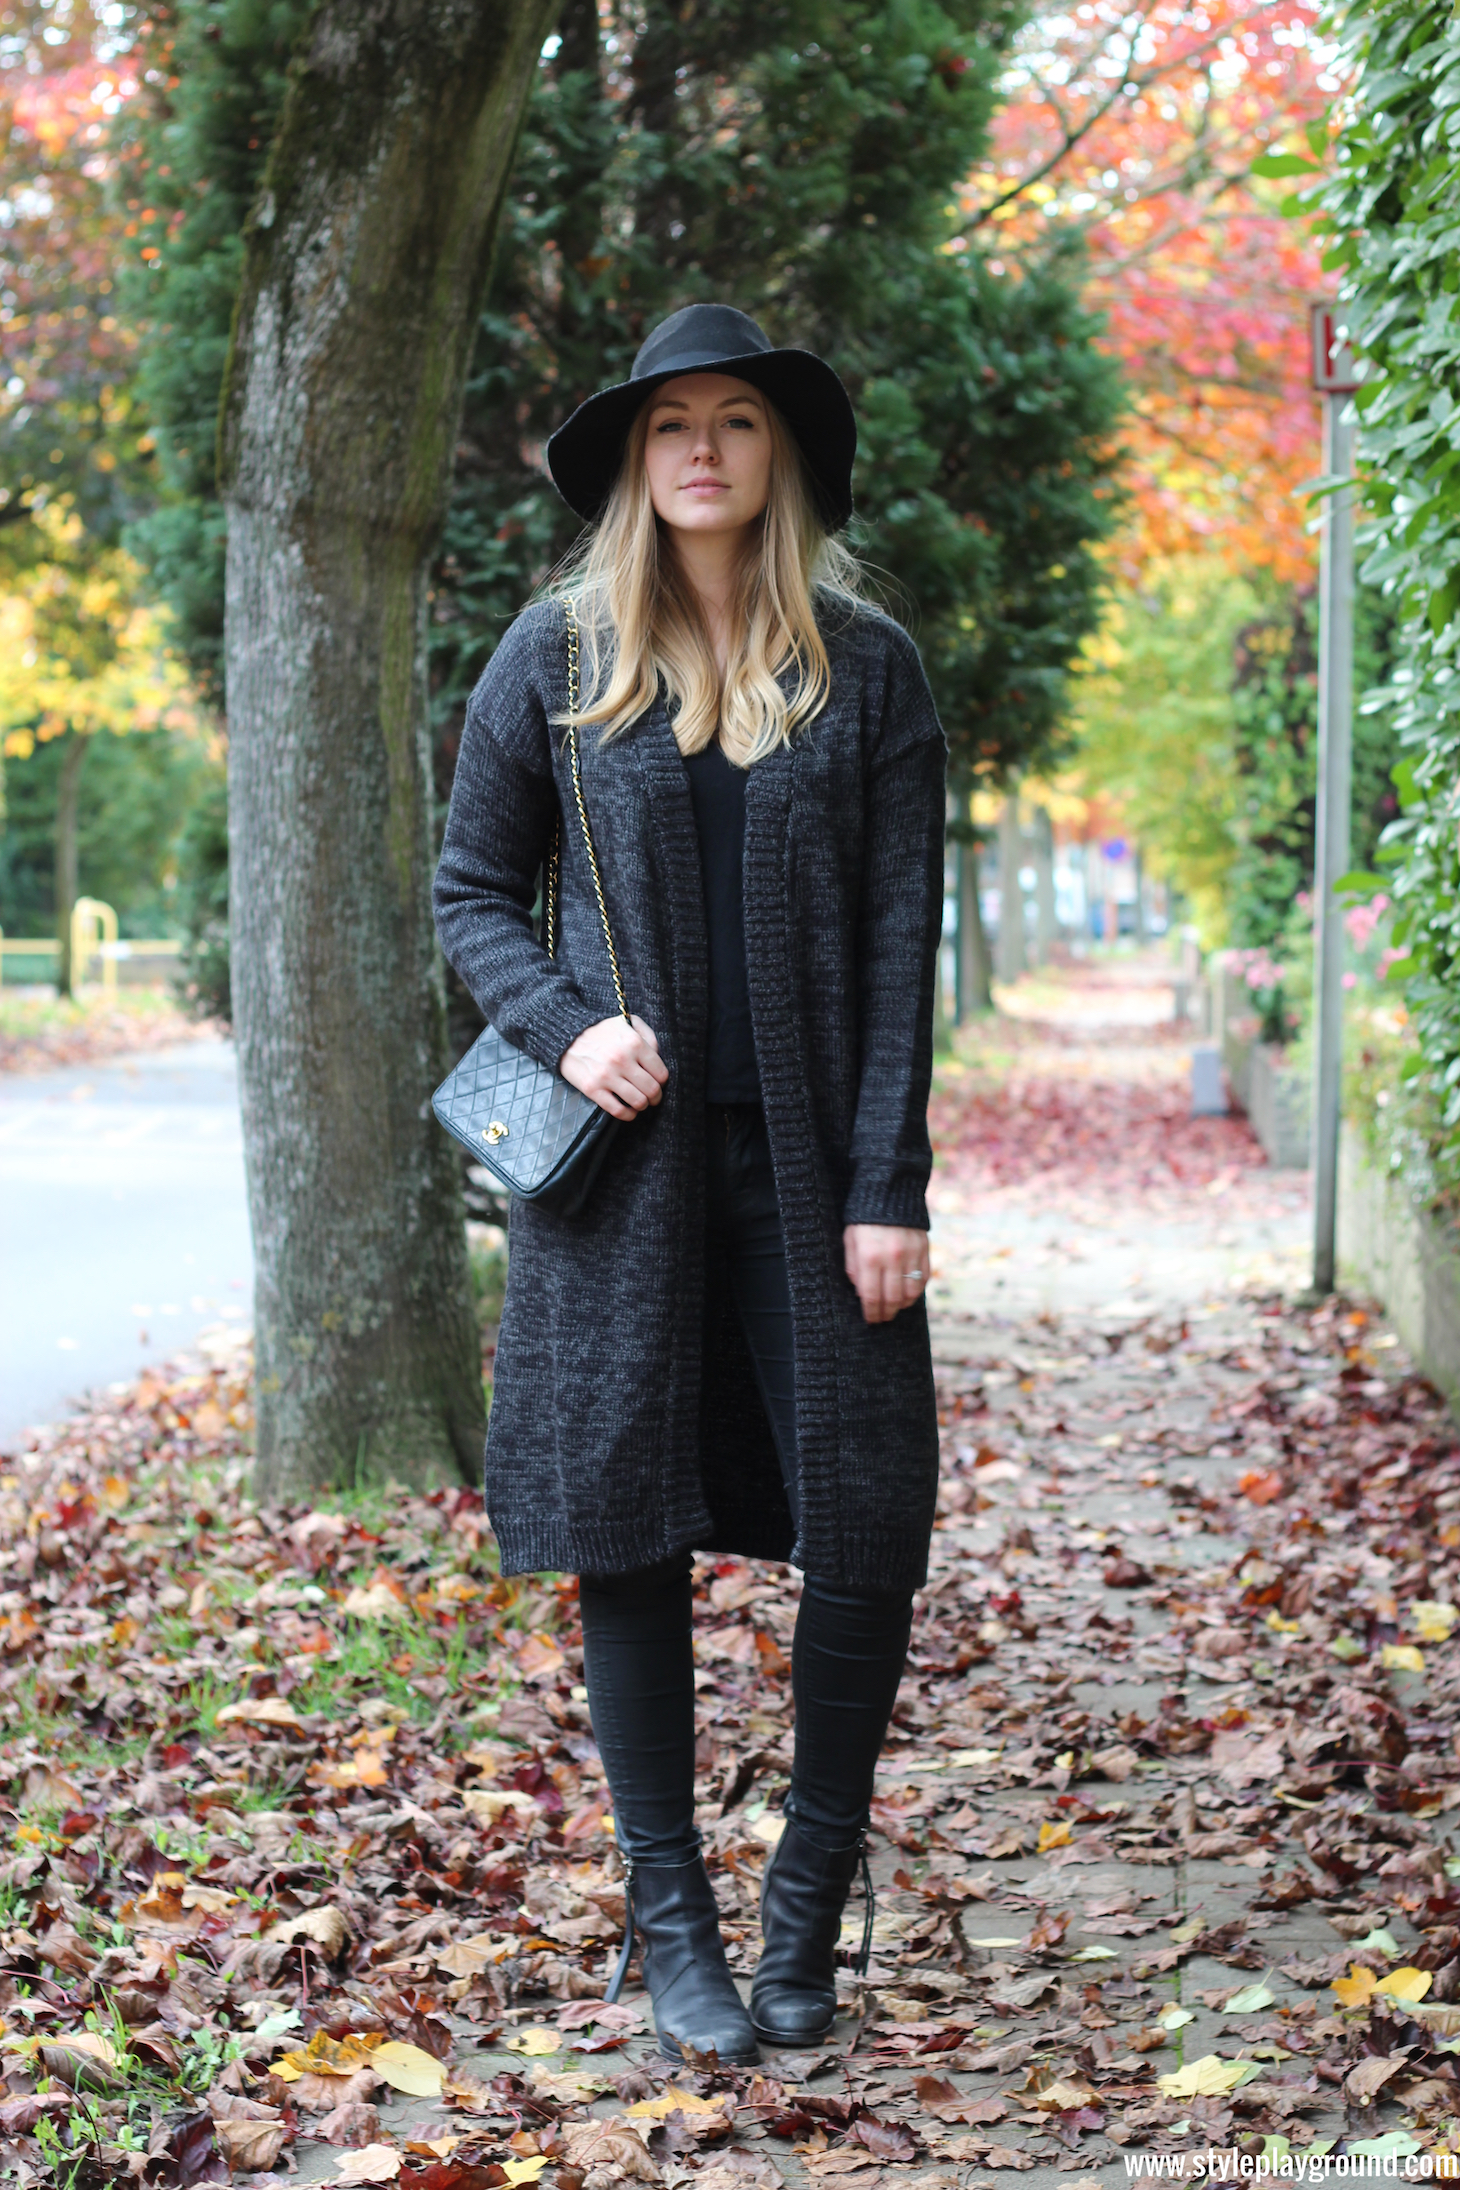 Wearable stories cardigan • Zara top & jeans • Vintage Chanel bag • Acne pistol boots • H&M hat via Style playground